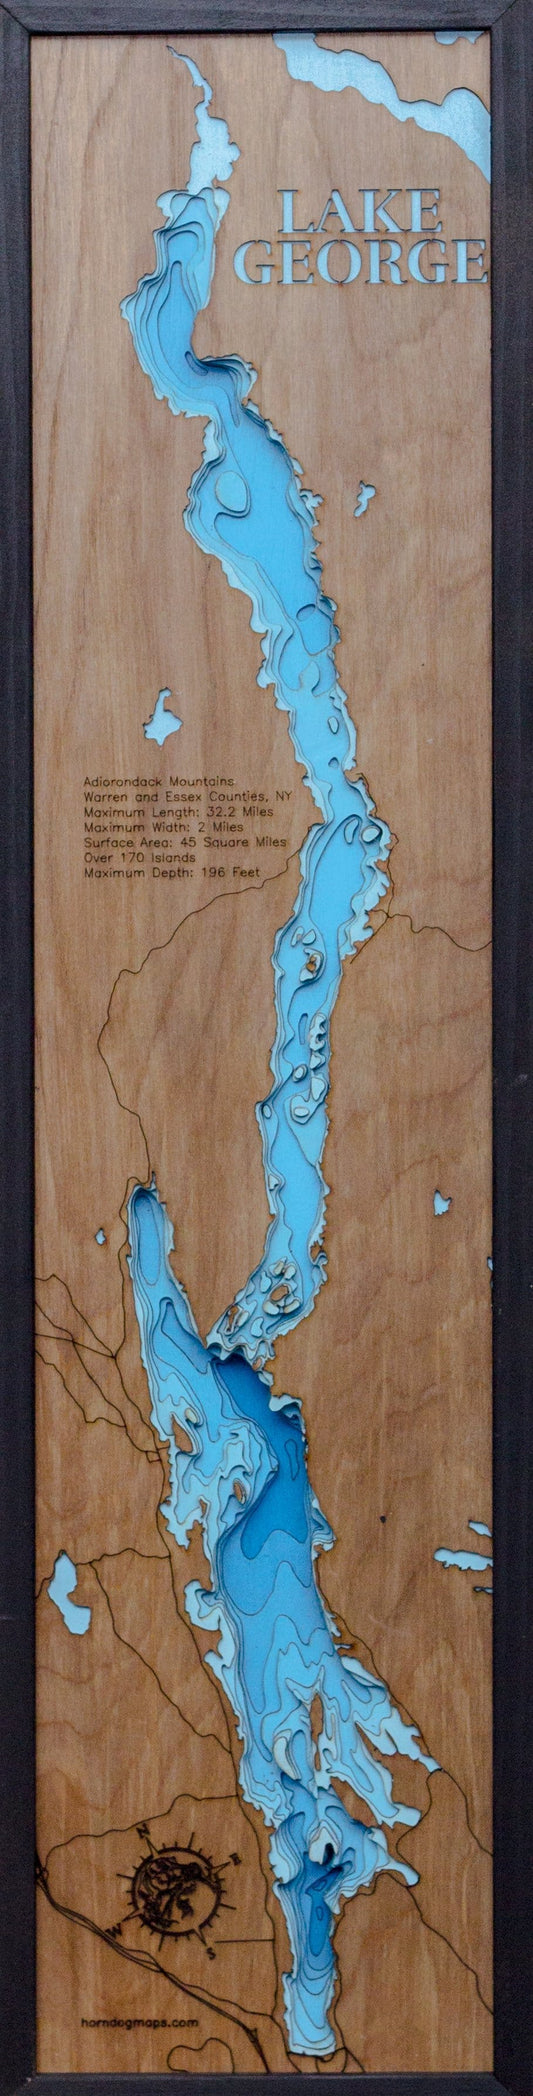 Lake George in Warren and Essex Counties, New York